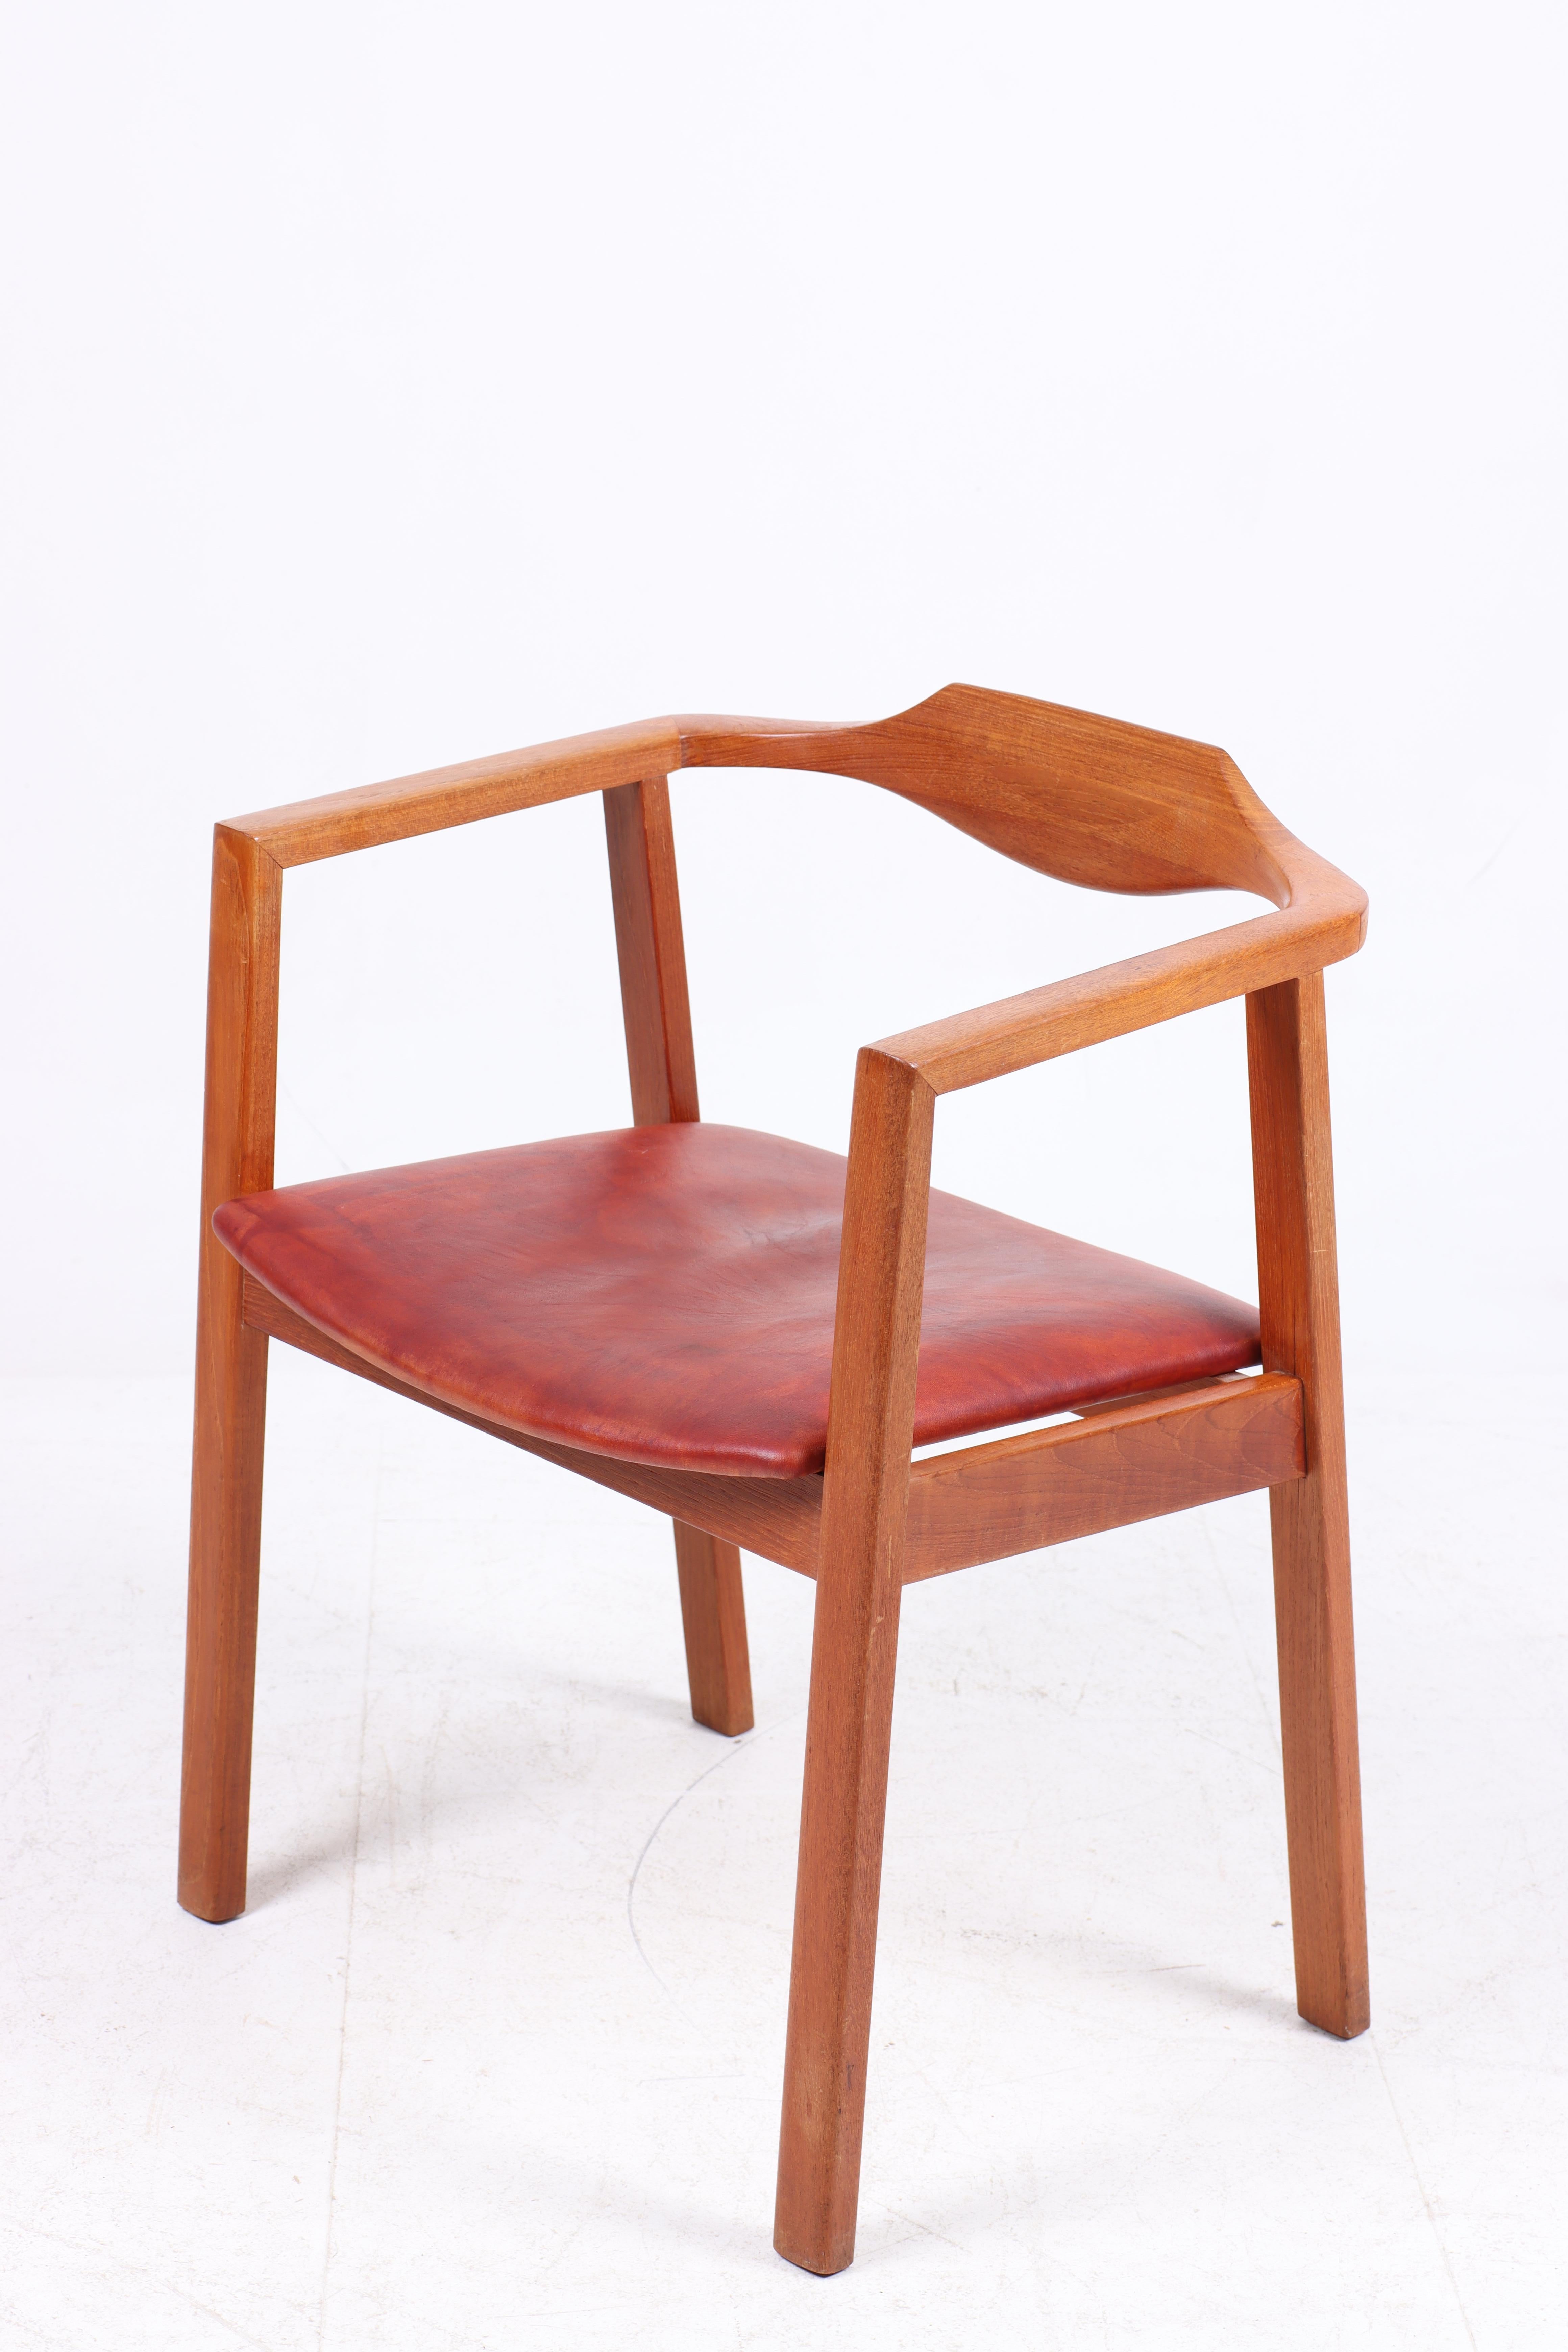 Danish armchair in patinated leather and solid teak frame. Designedand made in Denmark. Great original condition.